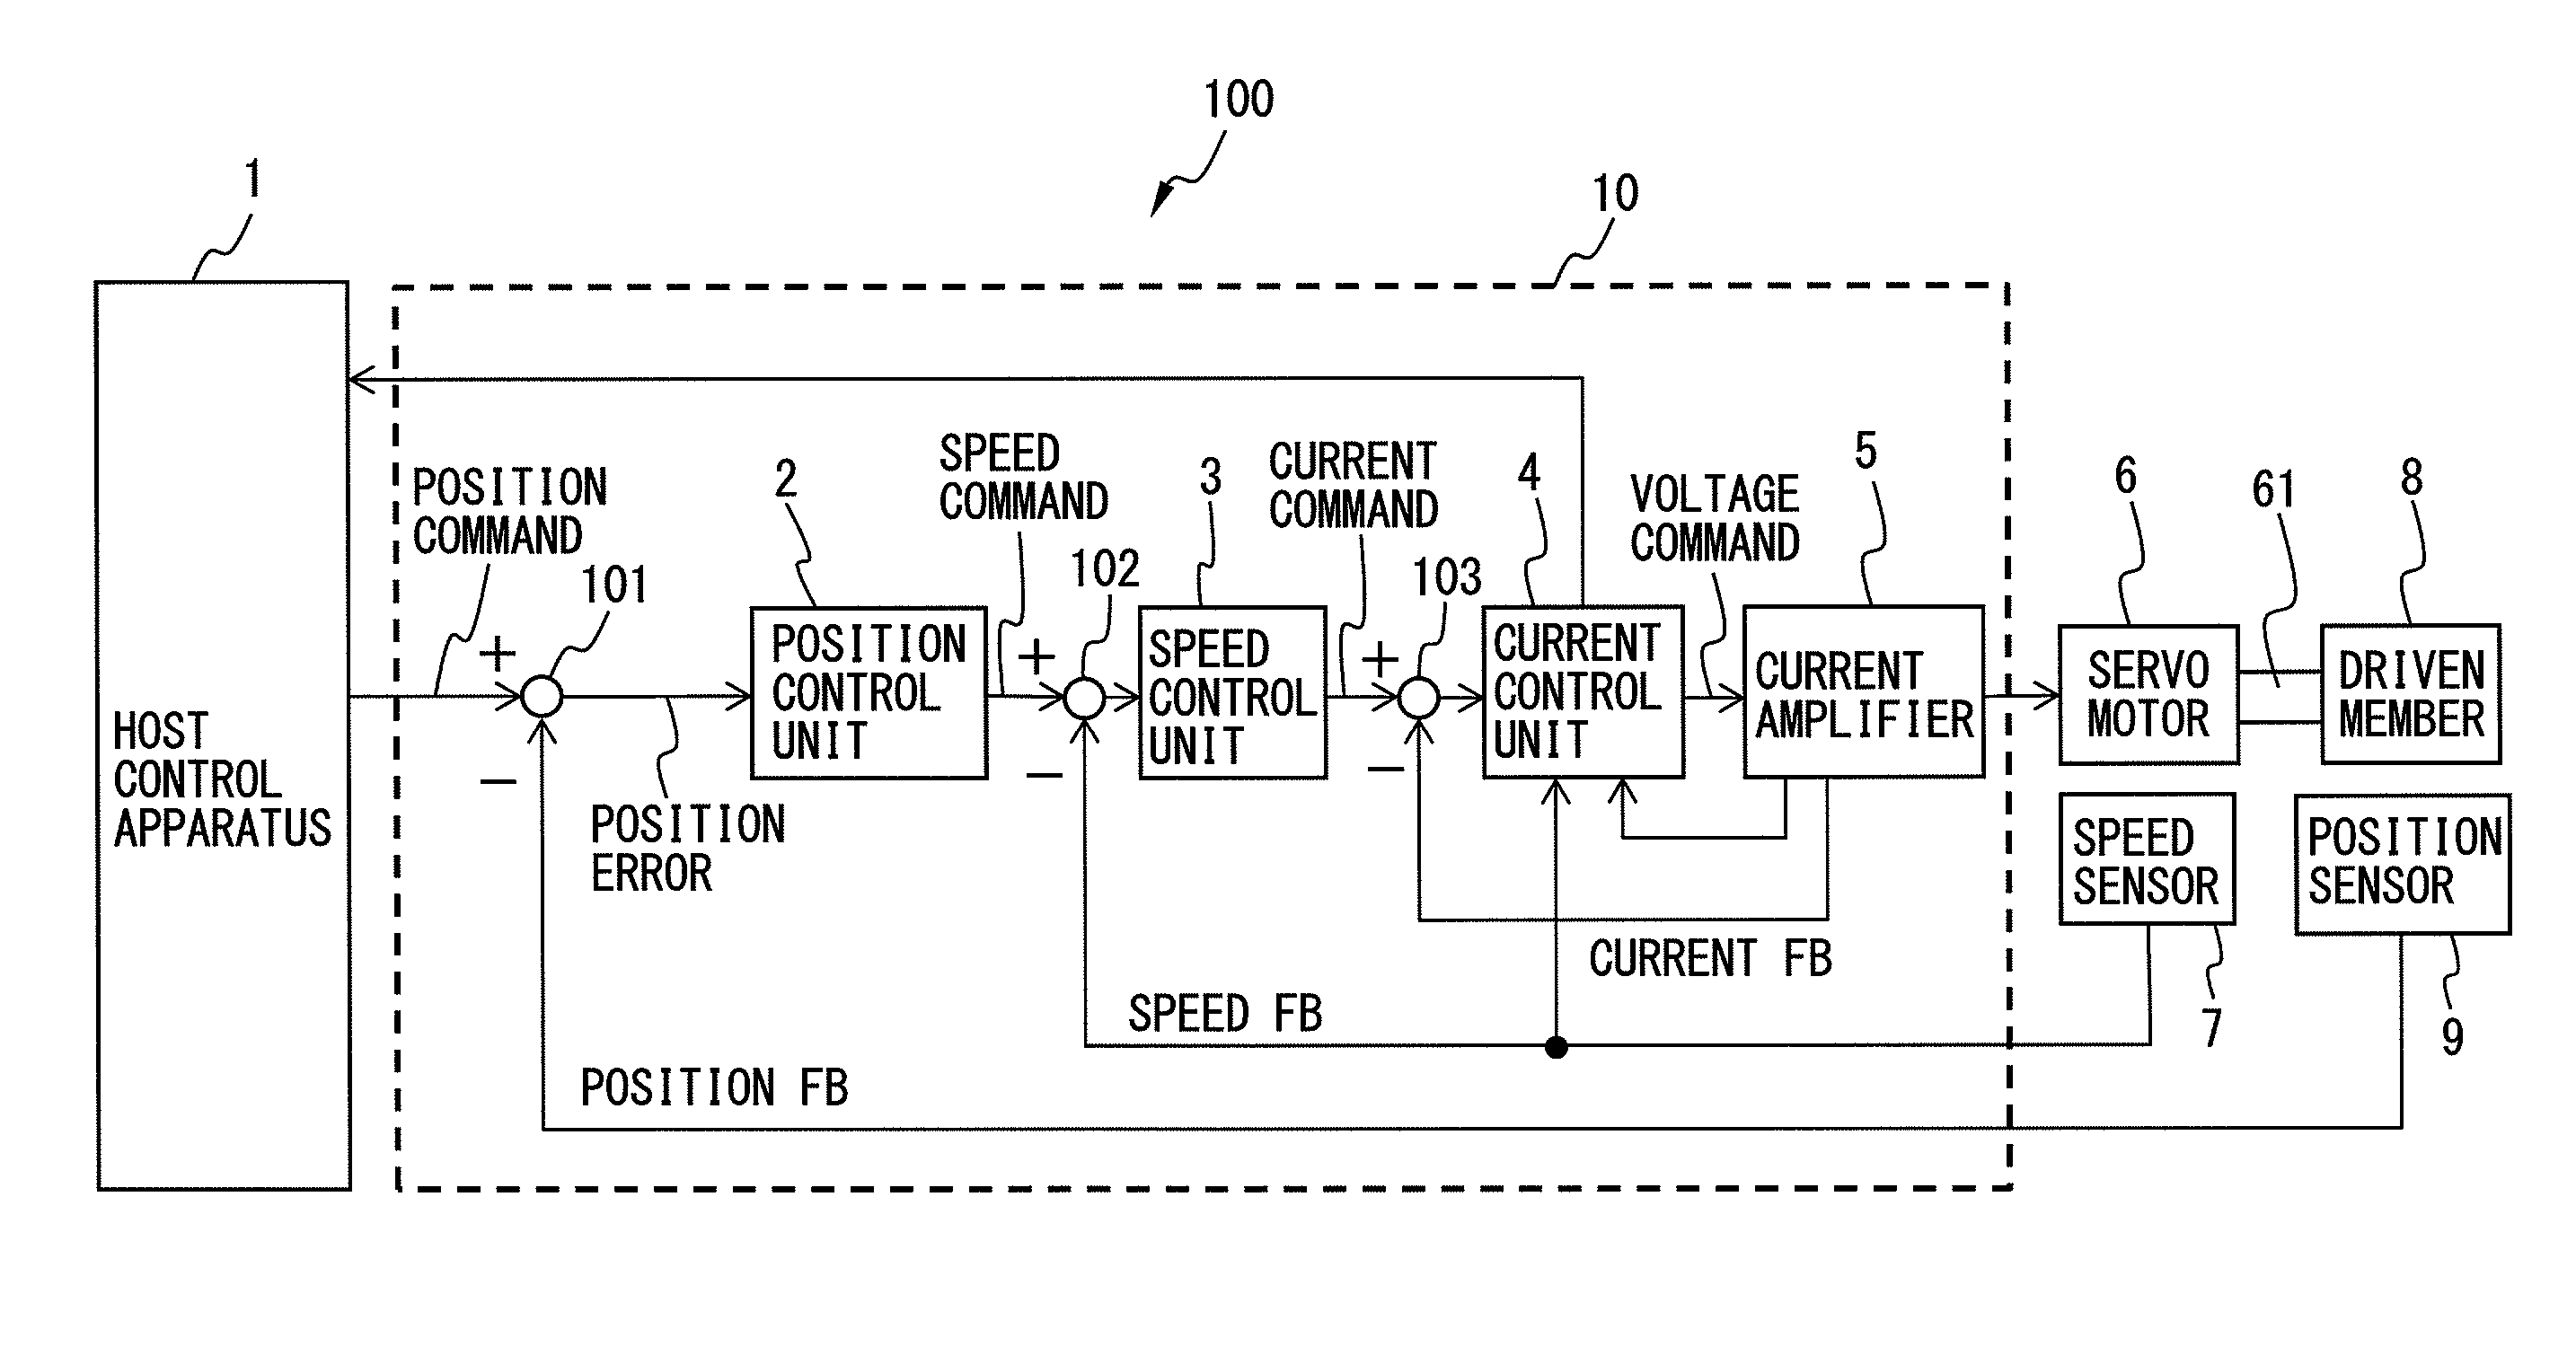 Motor control system that detects voltage saturation